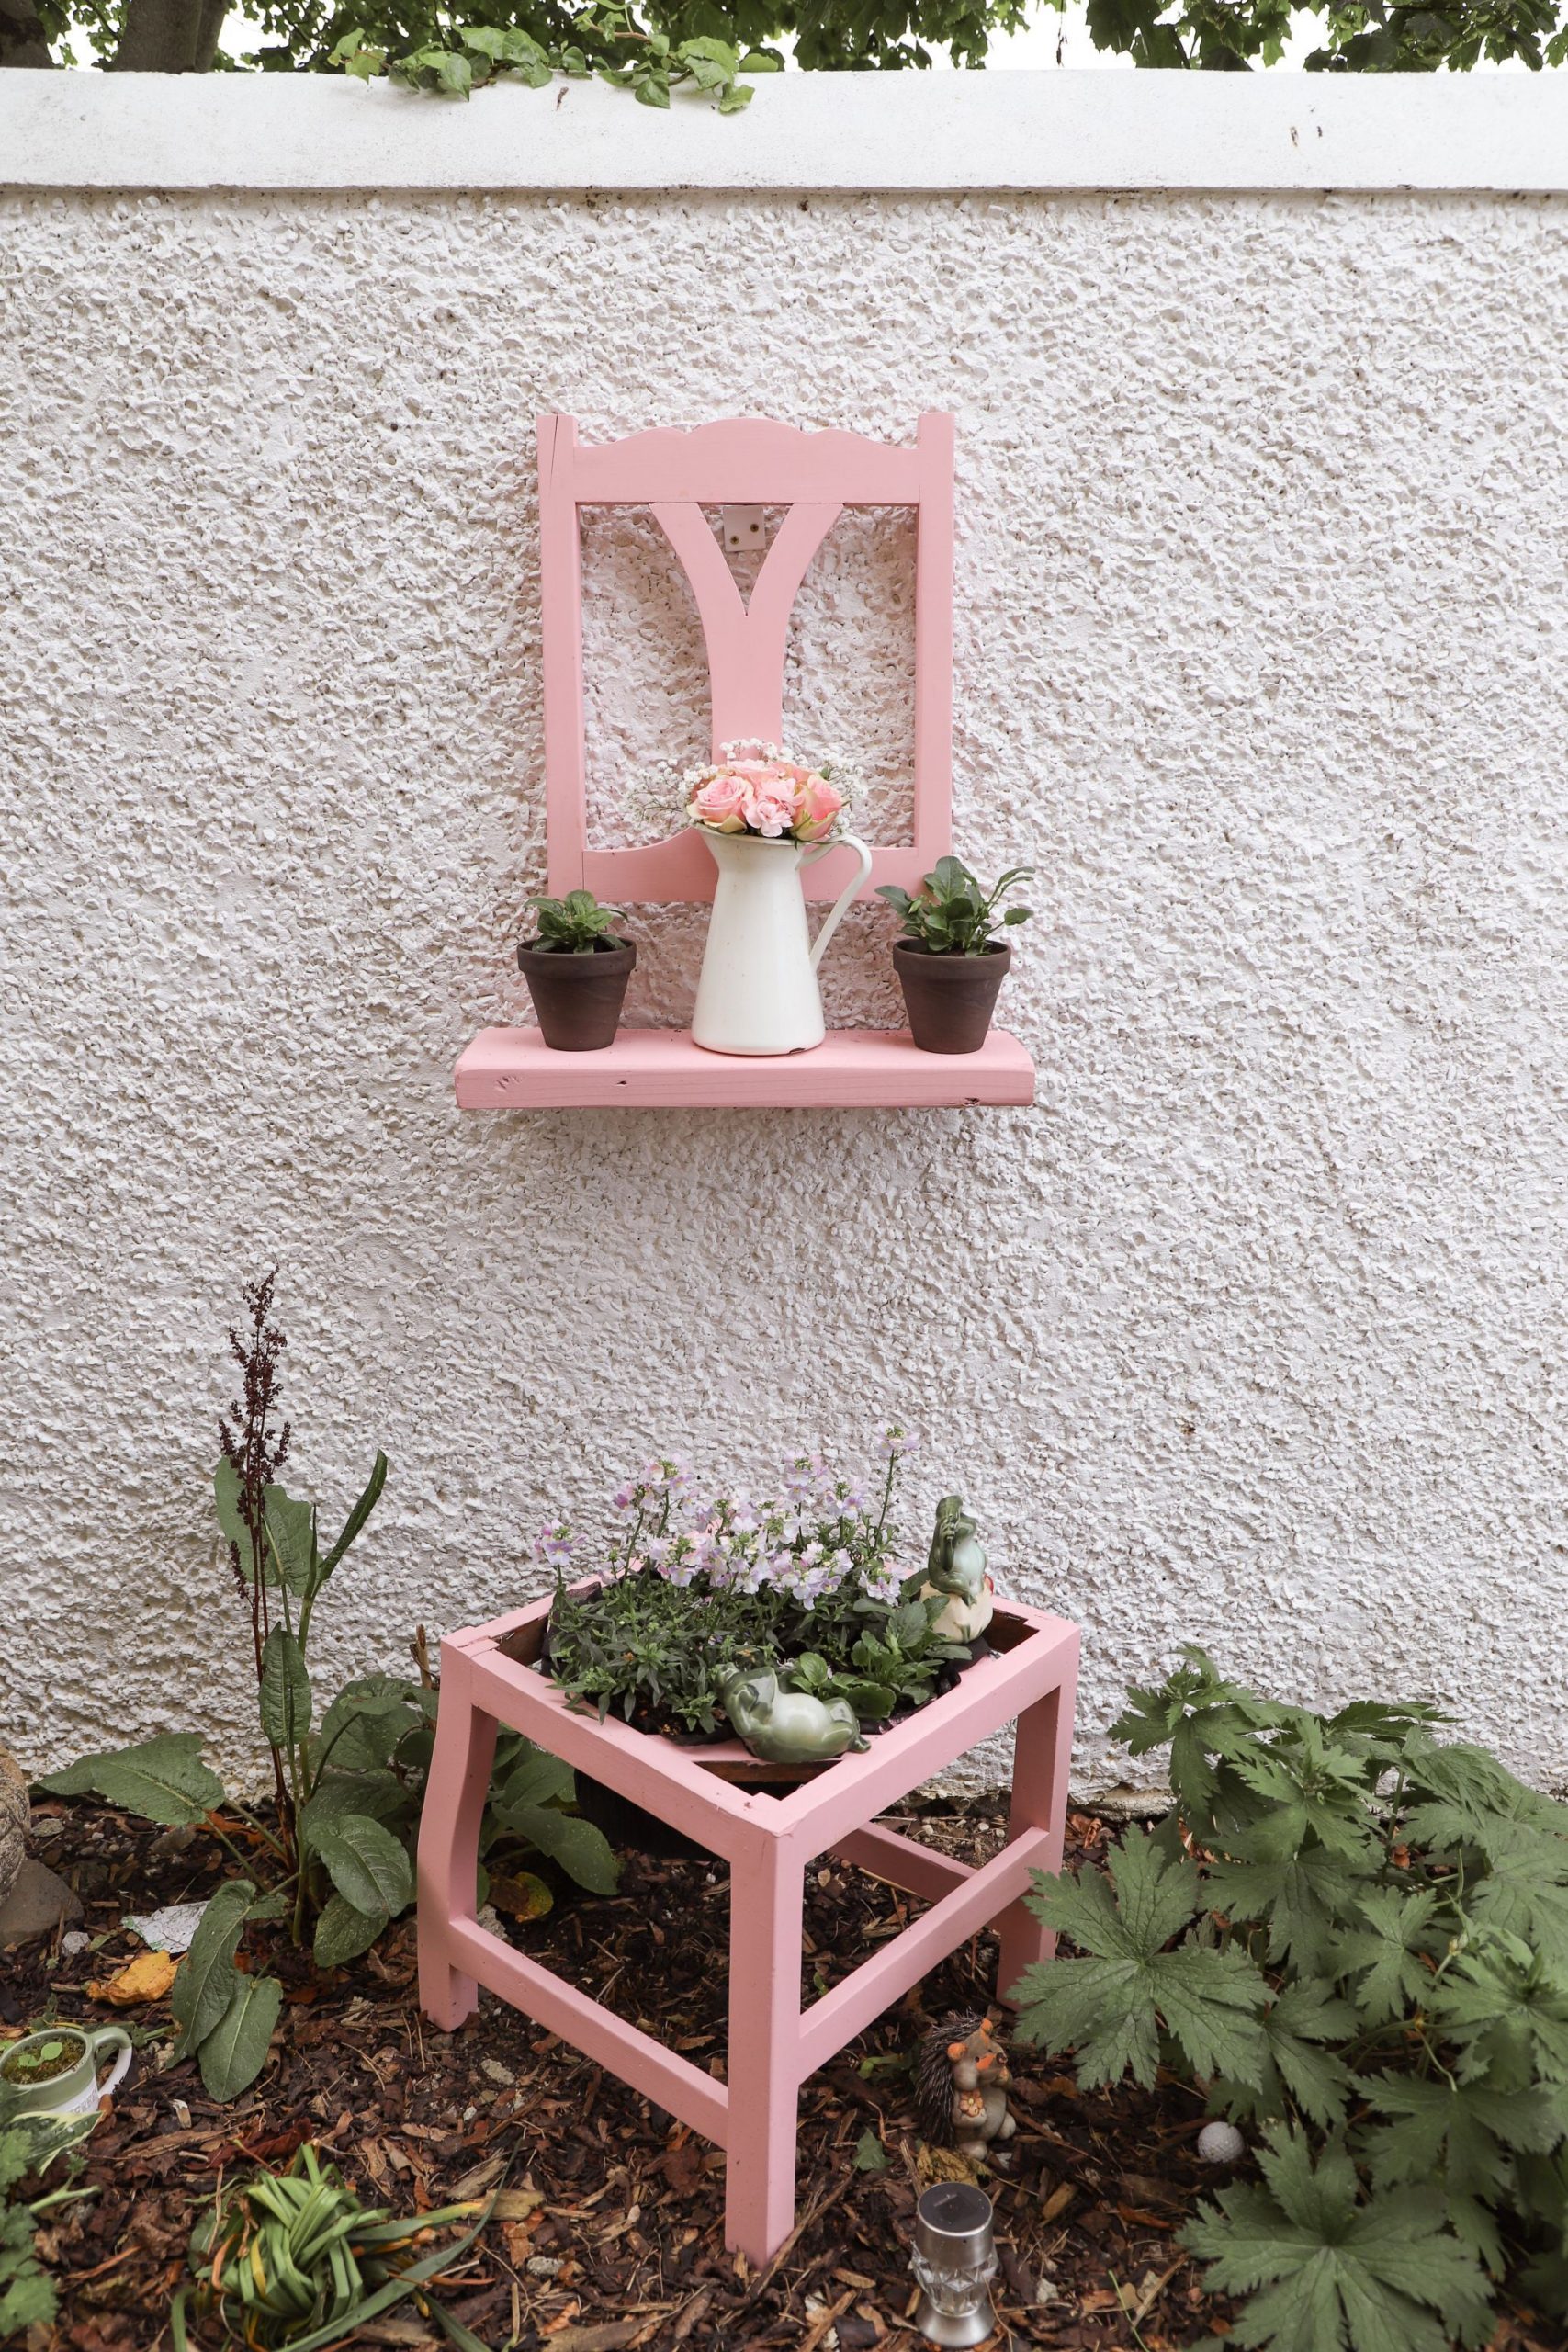 Recycle an old chair into a flower pot